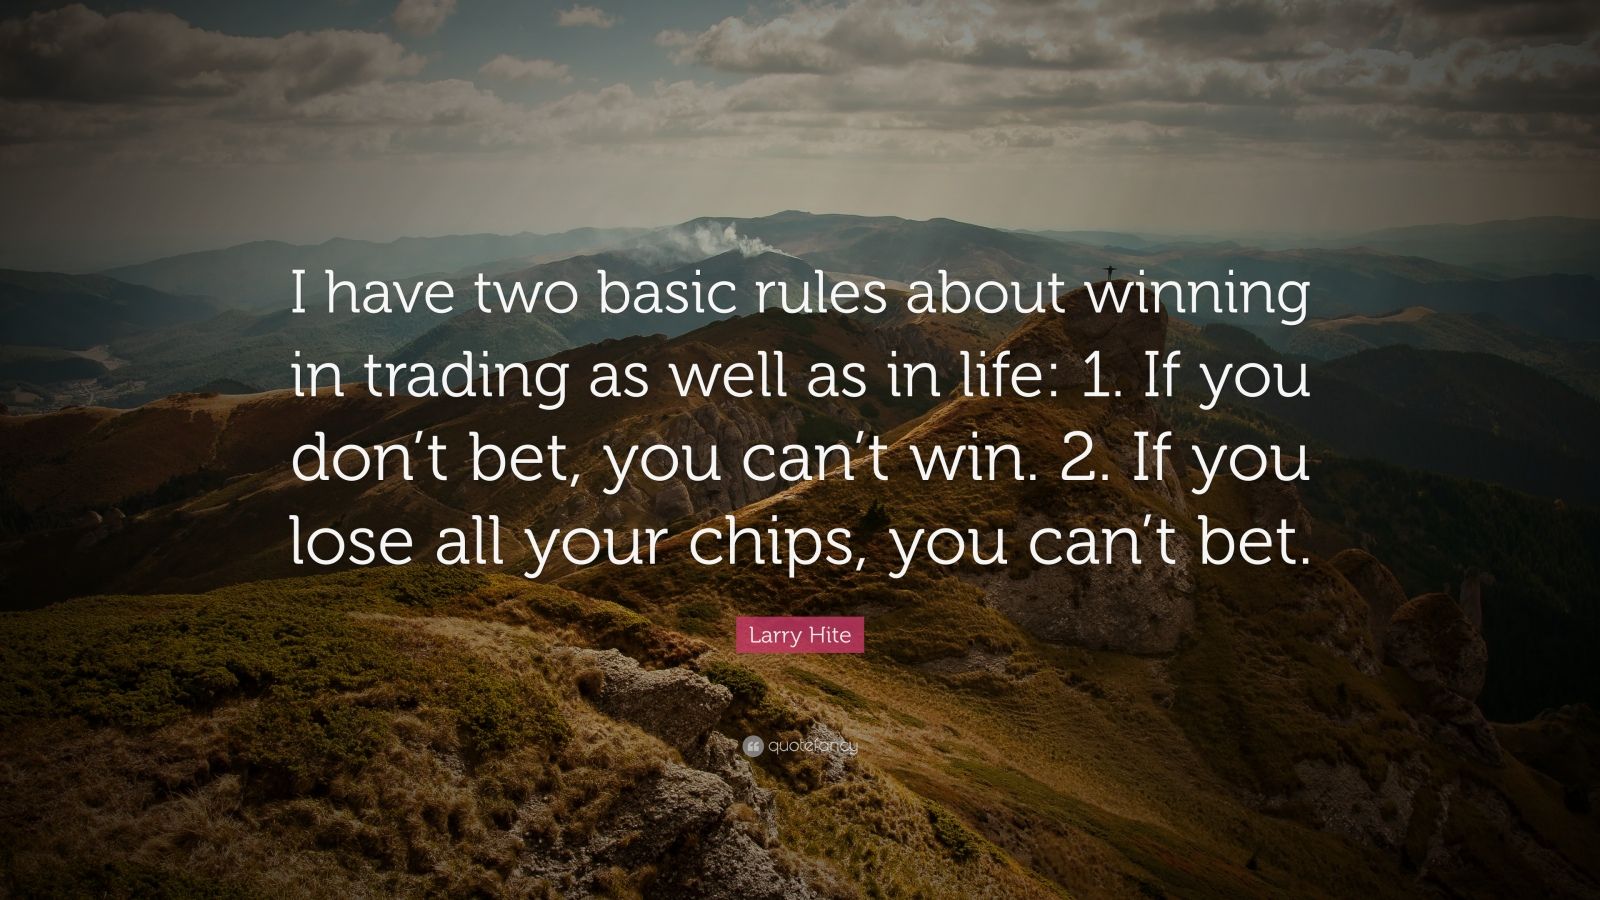 Larry Hite Quote: “I have two basic rules about winning in ...